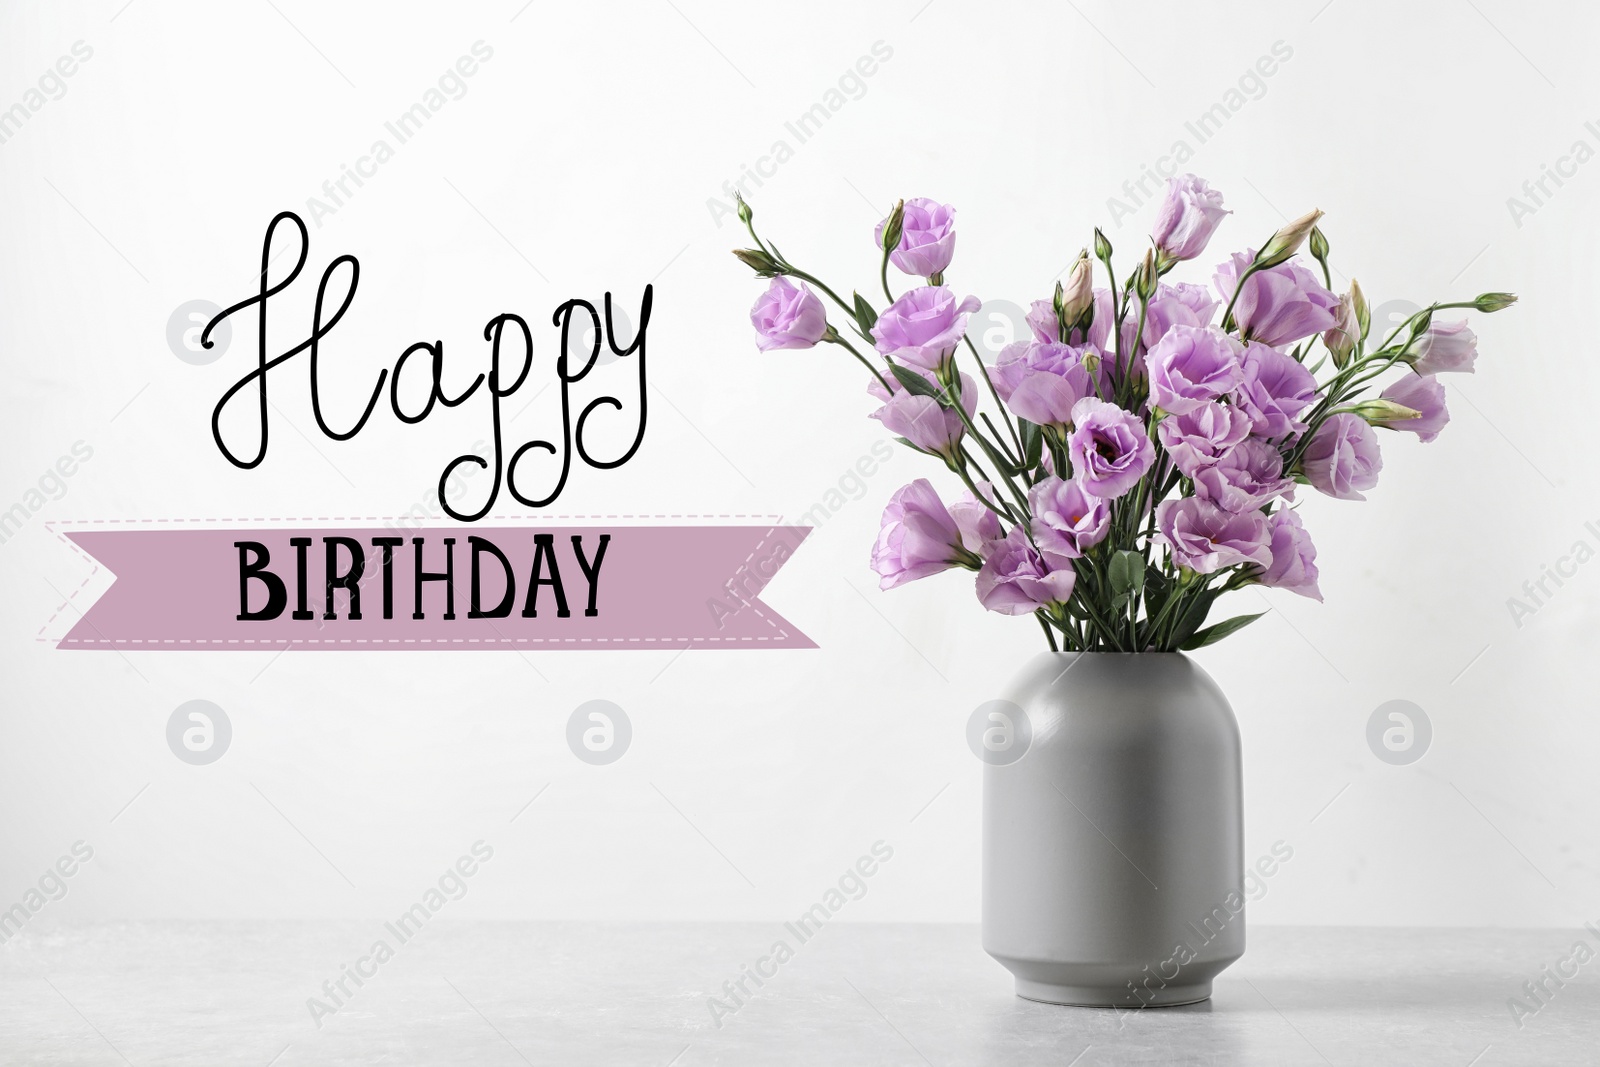 Image of Happy Birthday! Eustoma flowers in vase on table near white wall 